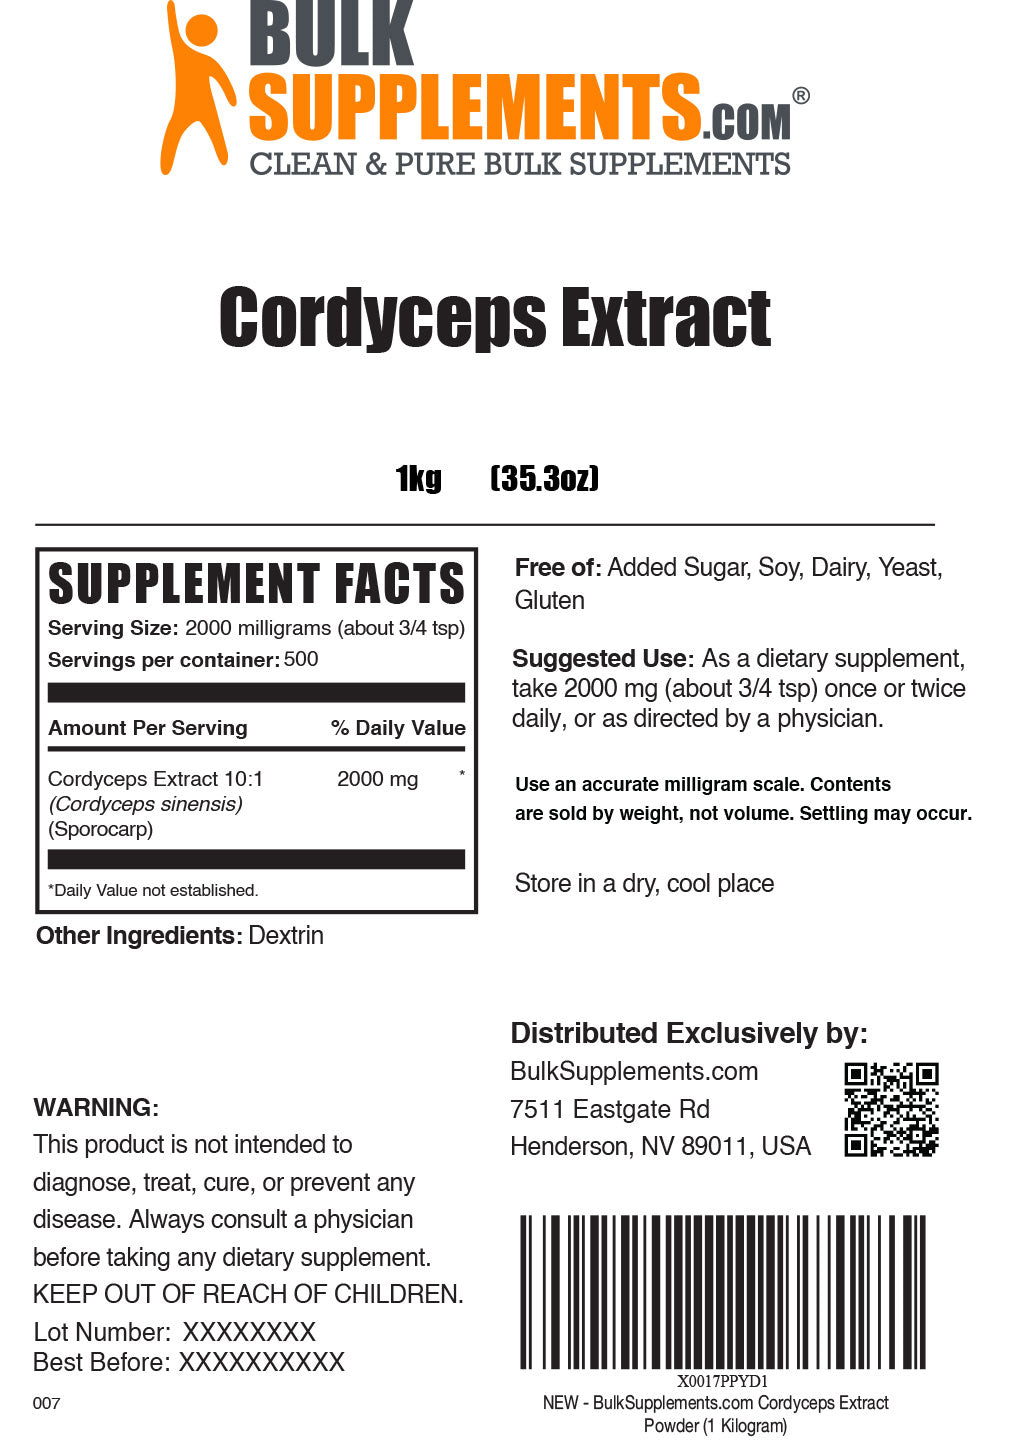 Supplement Facts for Cordyceps Extract